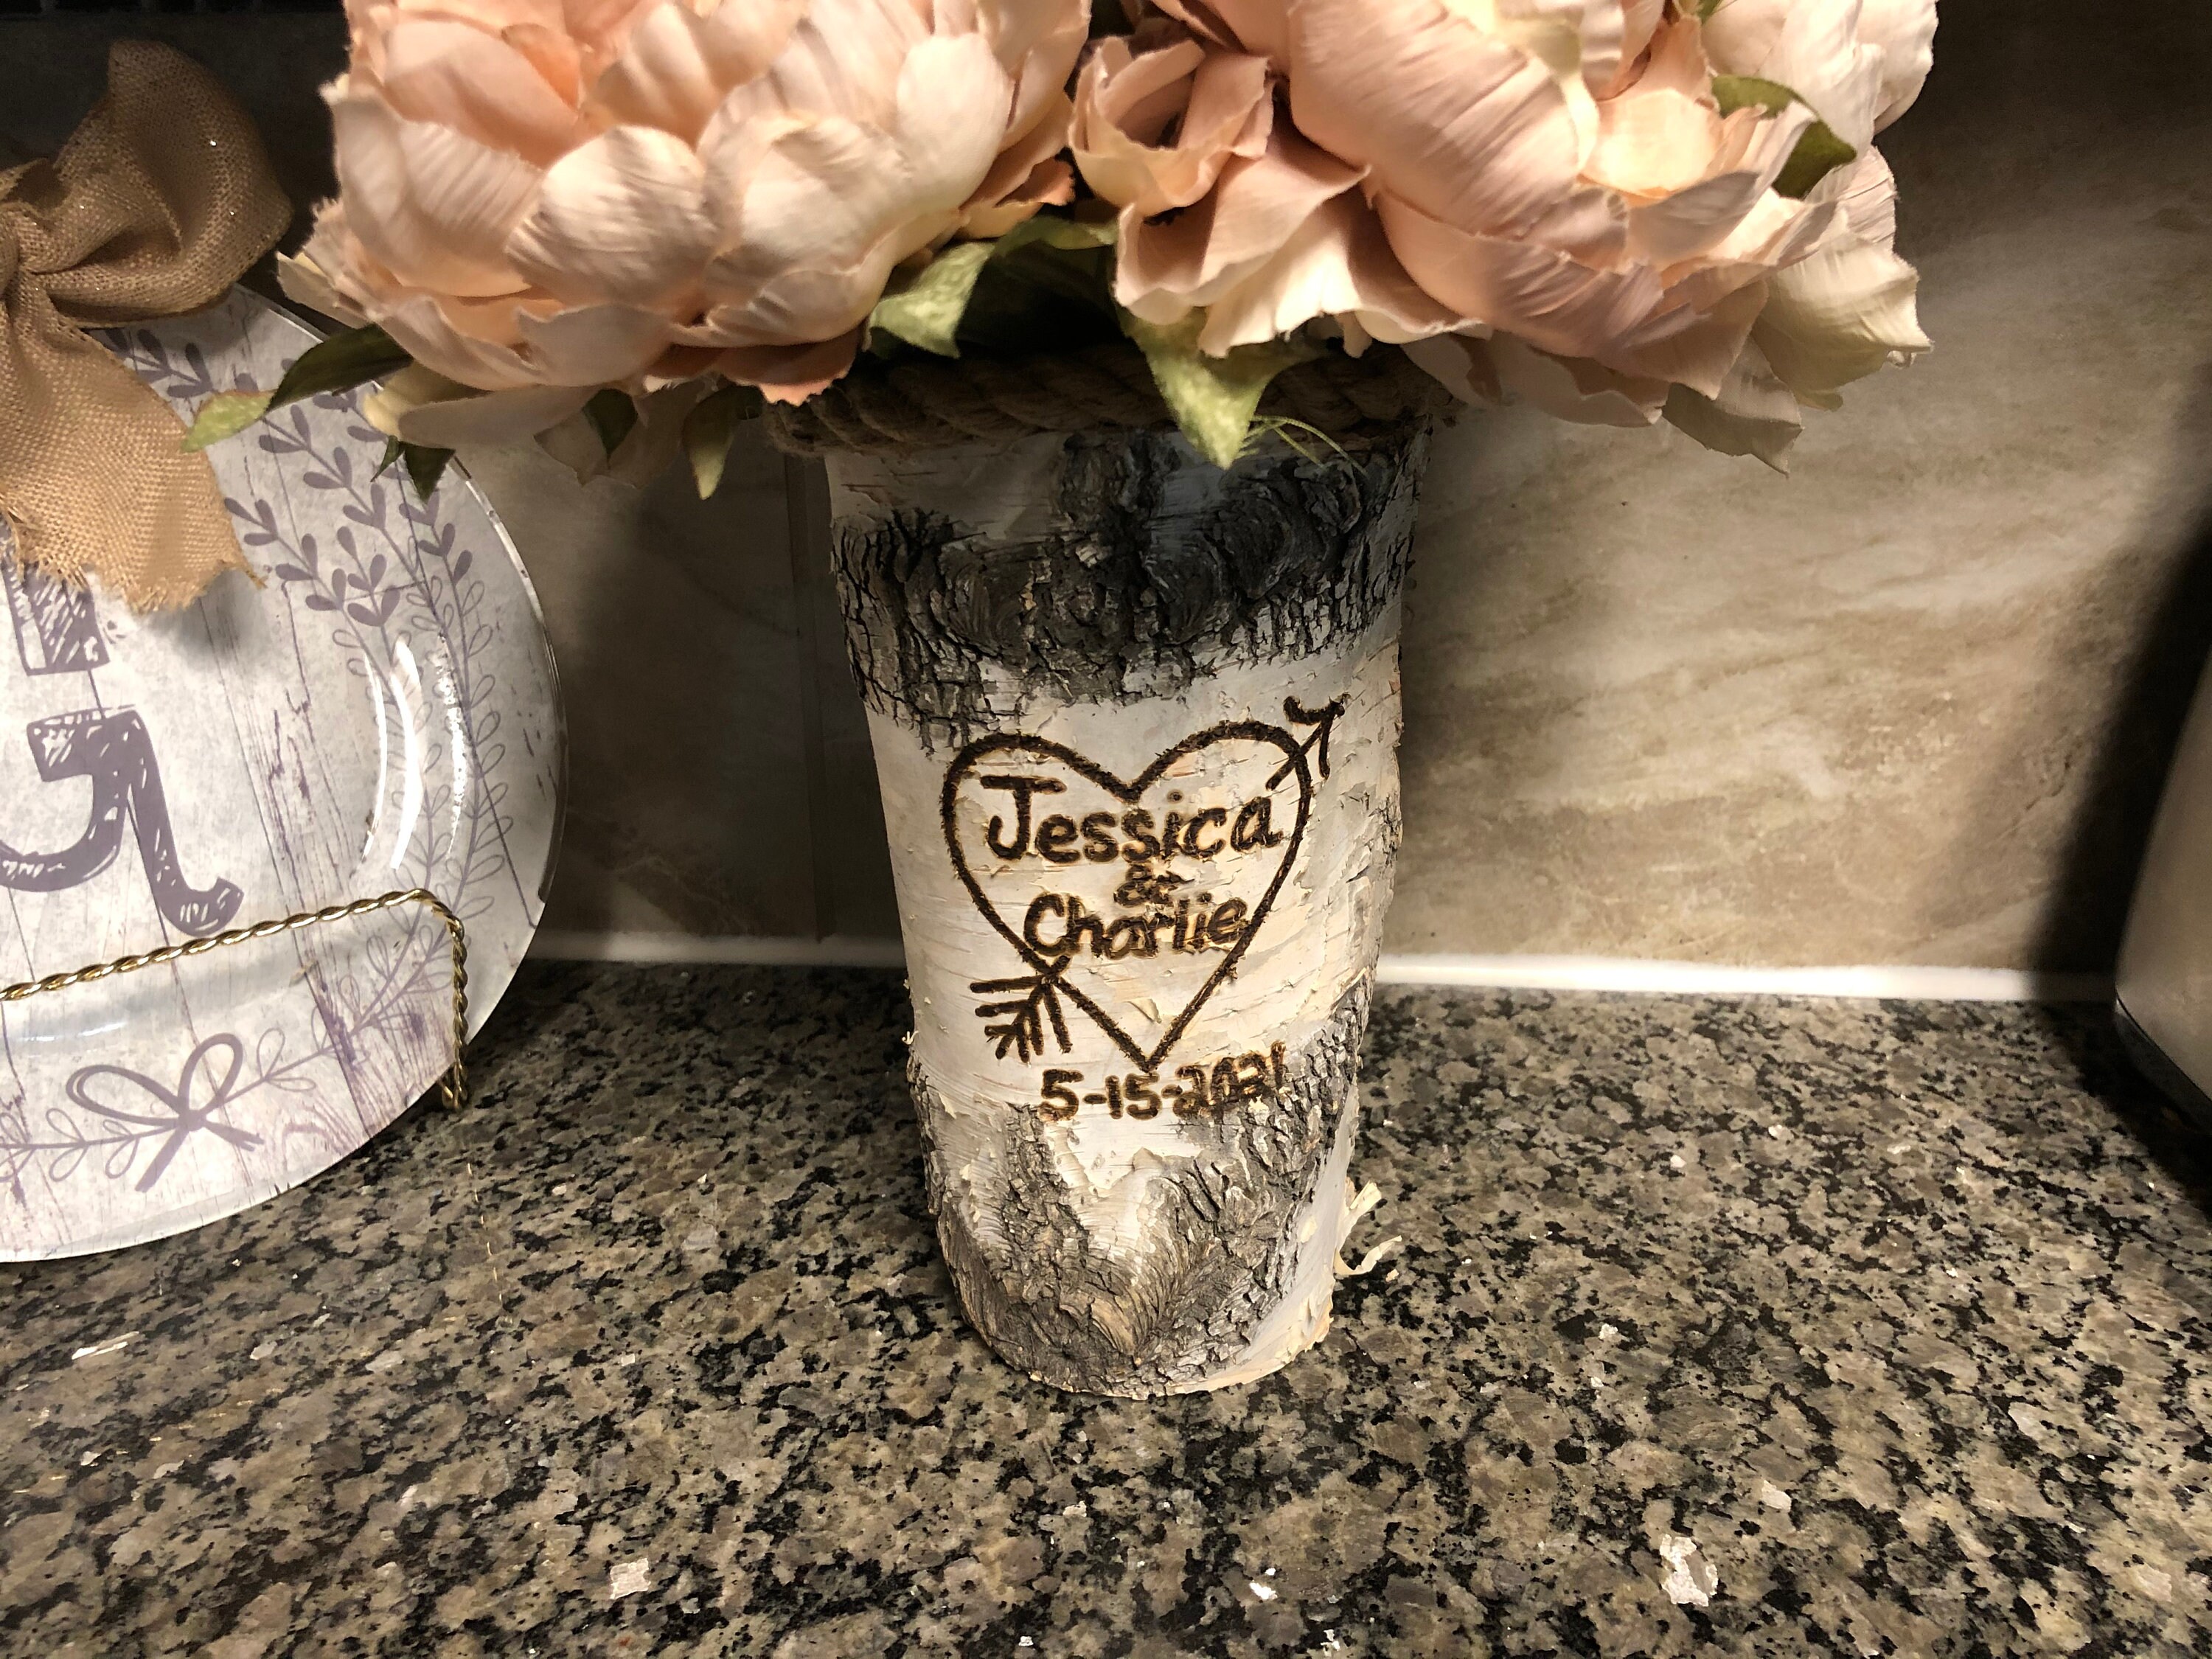 Wood Flower Vase, Engagement Gifts for Couple Unique, 1 Year Anniversary  Gift, Newlywed Gift, Engaged Gift Unique, Personalized Vase 